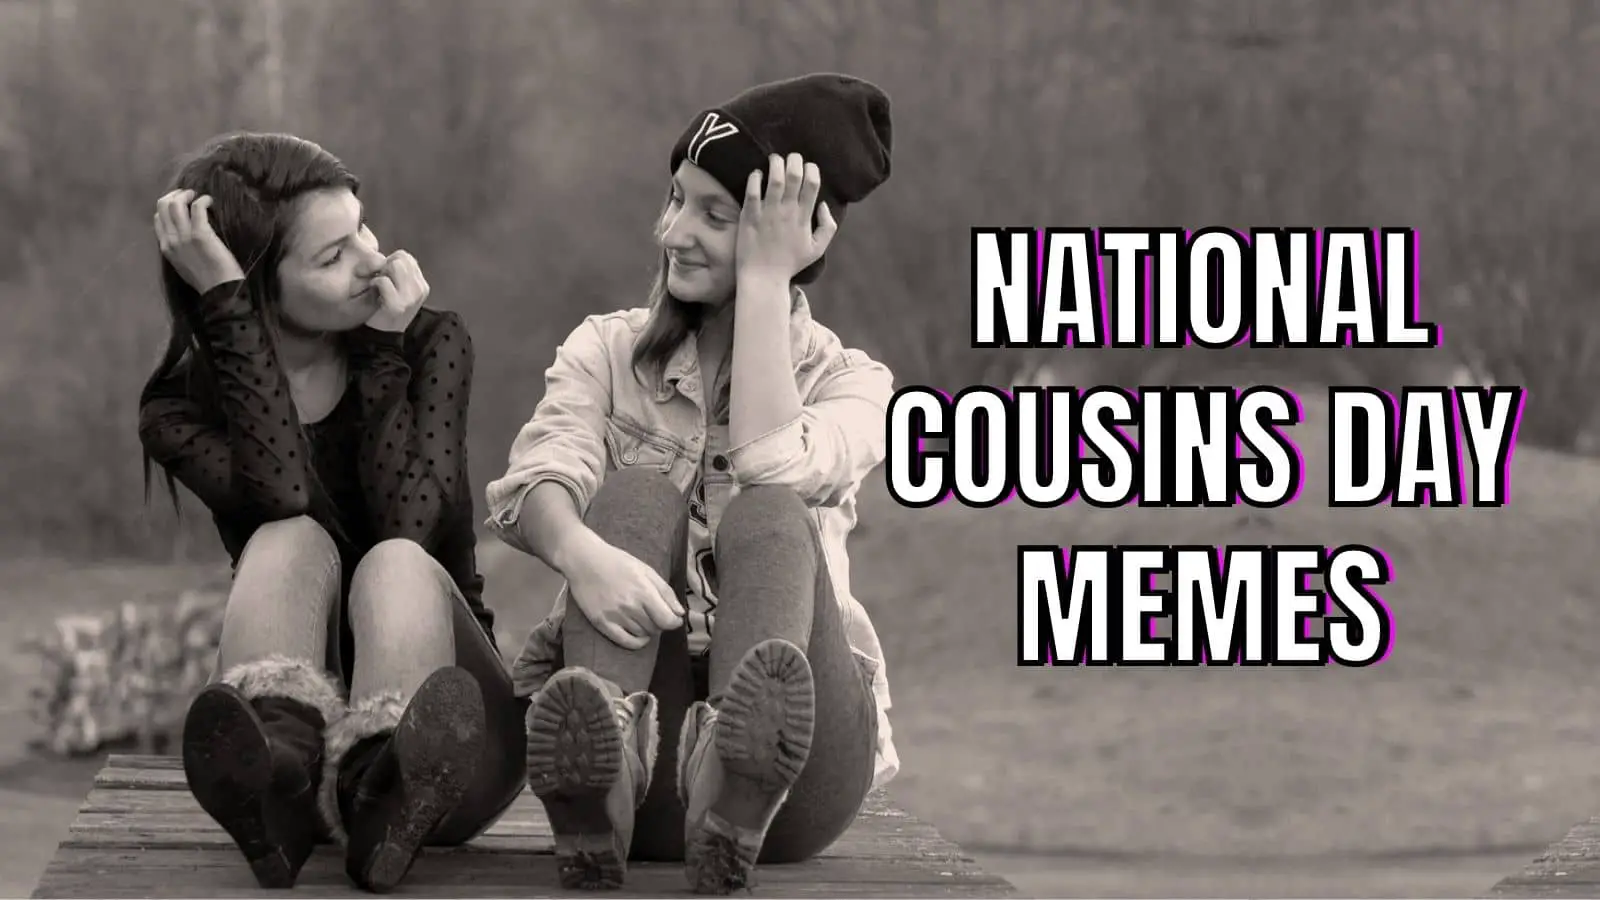 National Cousins Day Memes on Girls